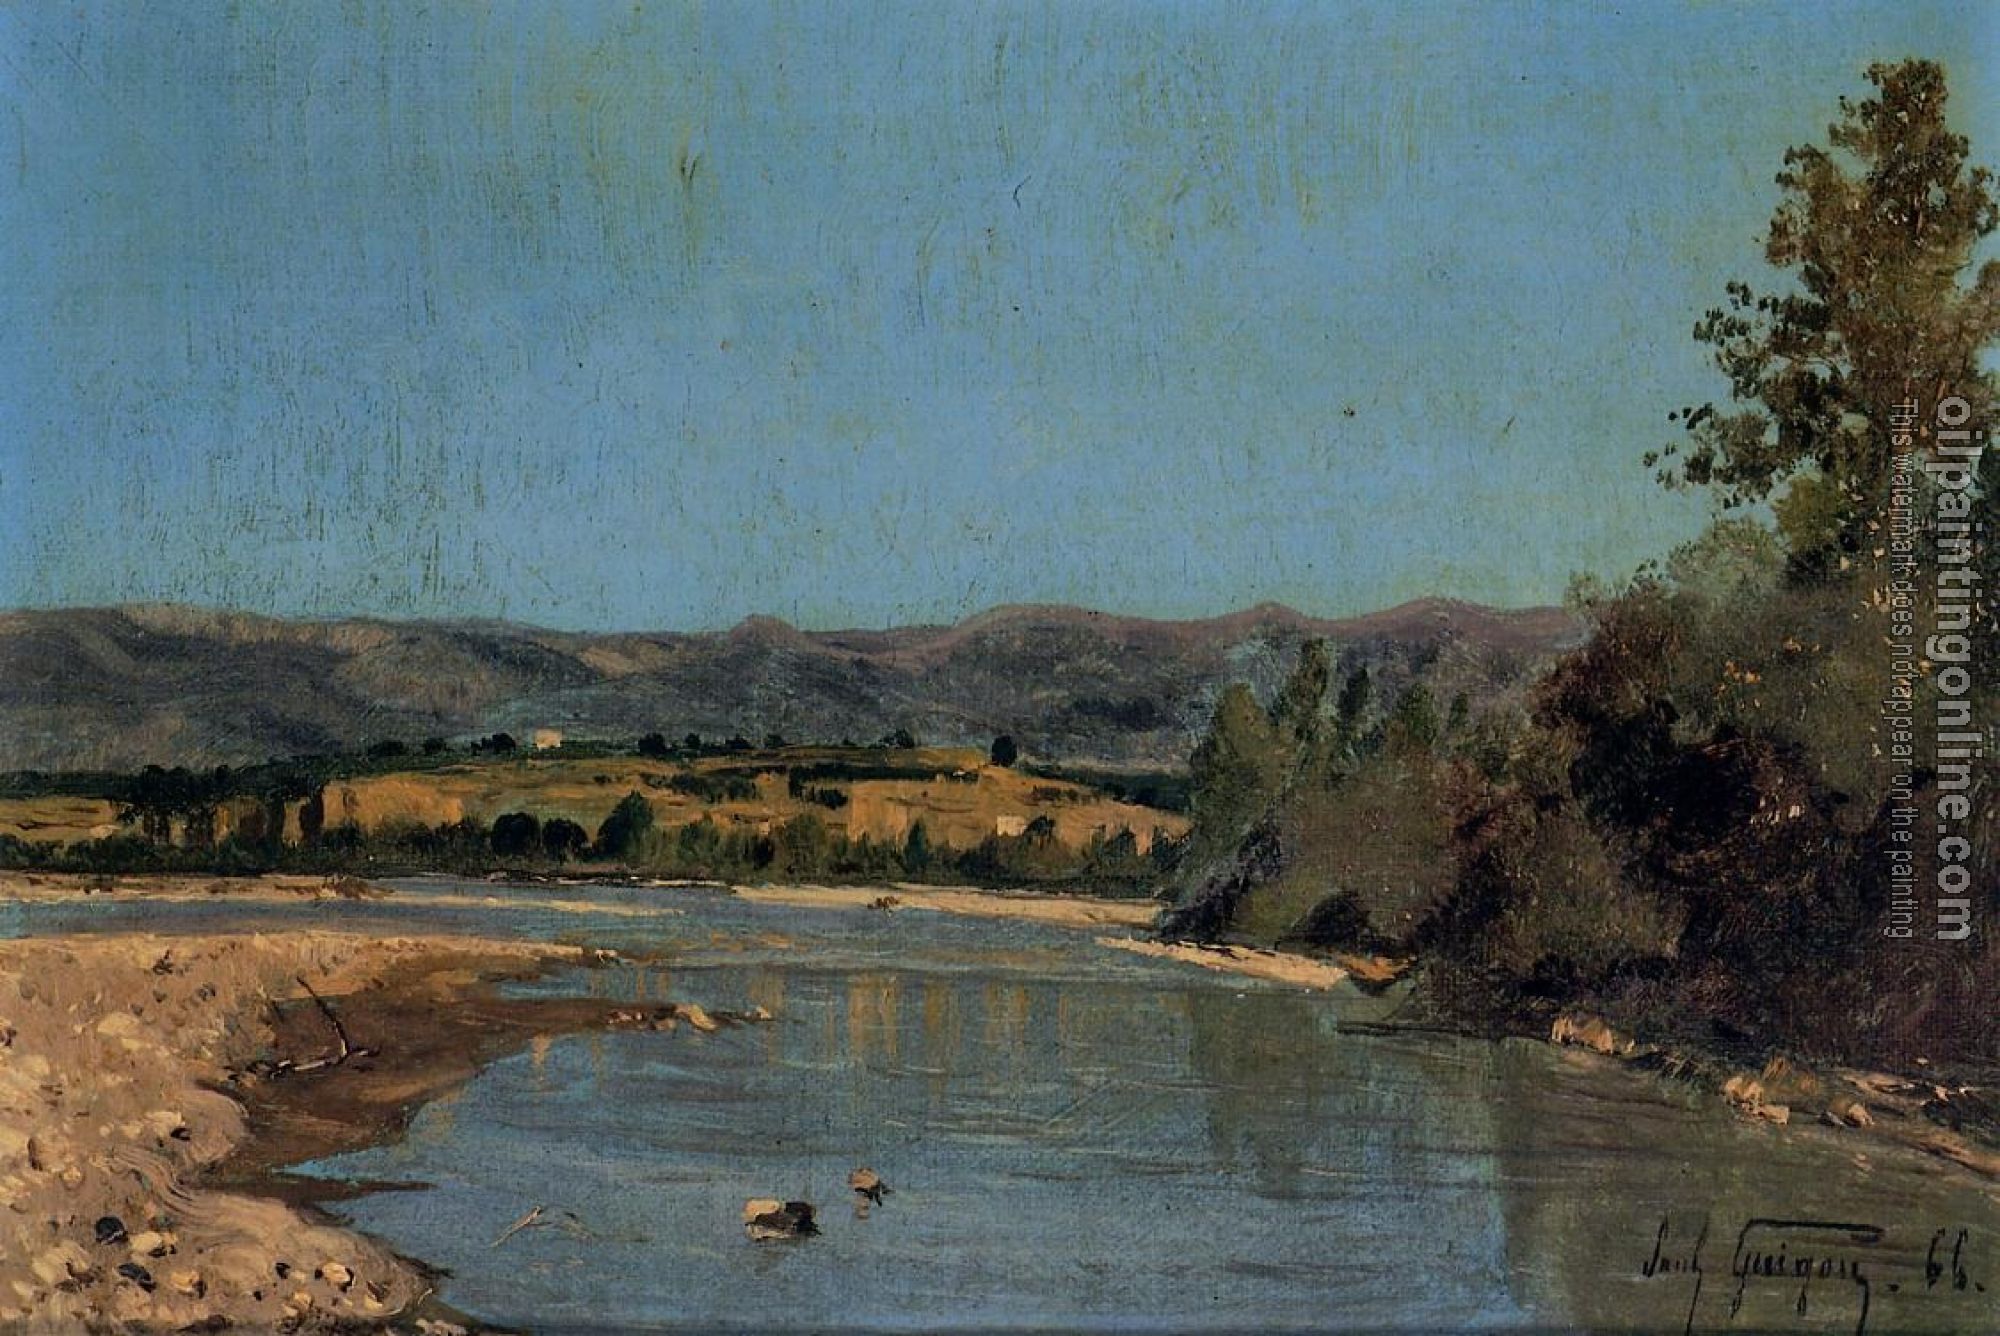 Guigou, Paul-Camille - The Banks of the Durance at Puivert 1